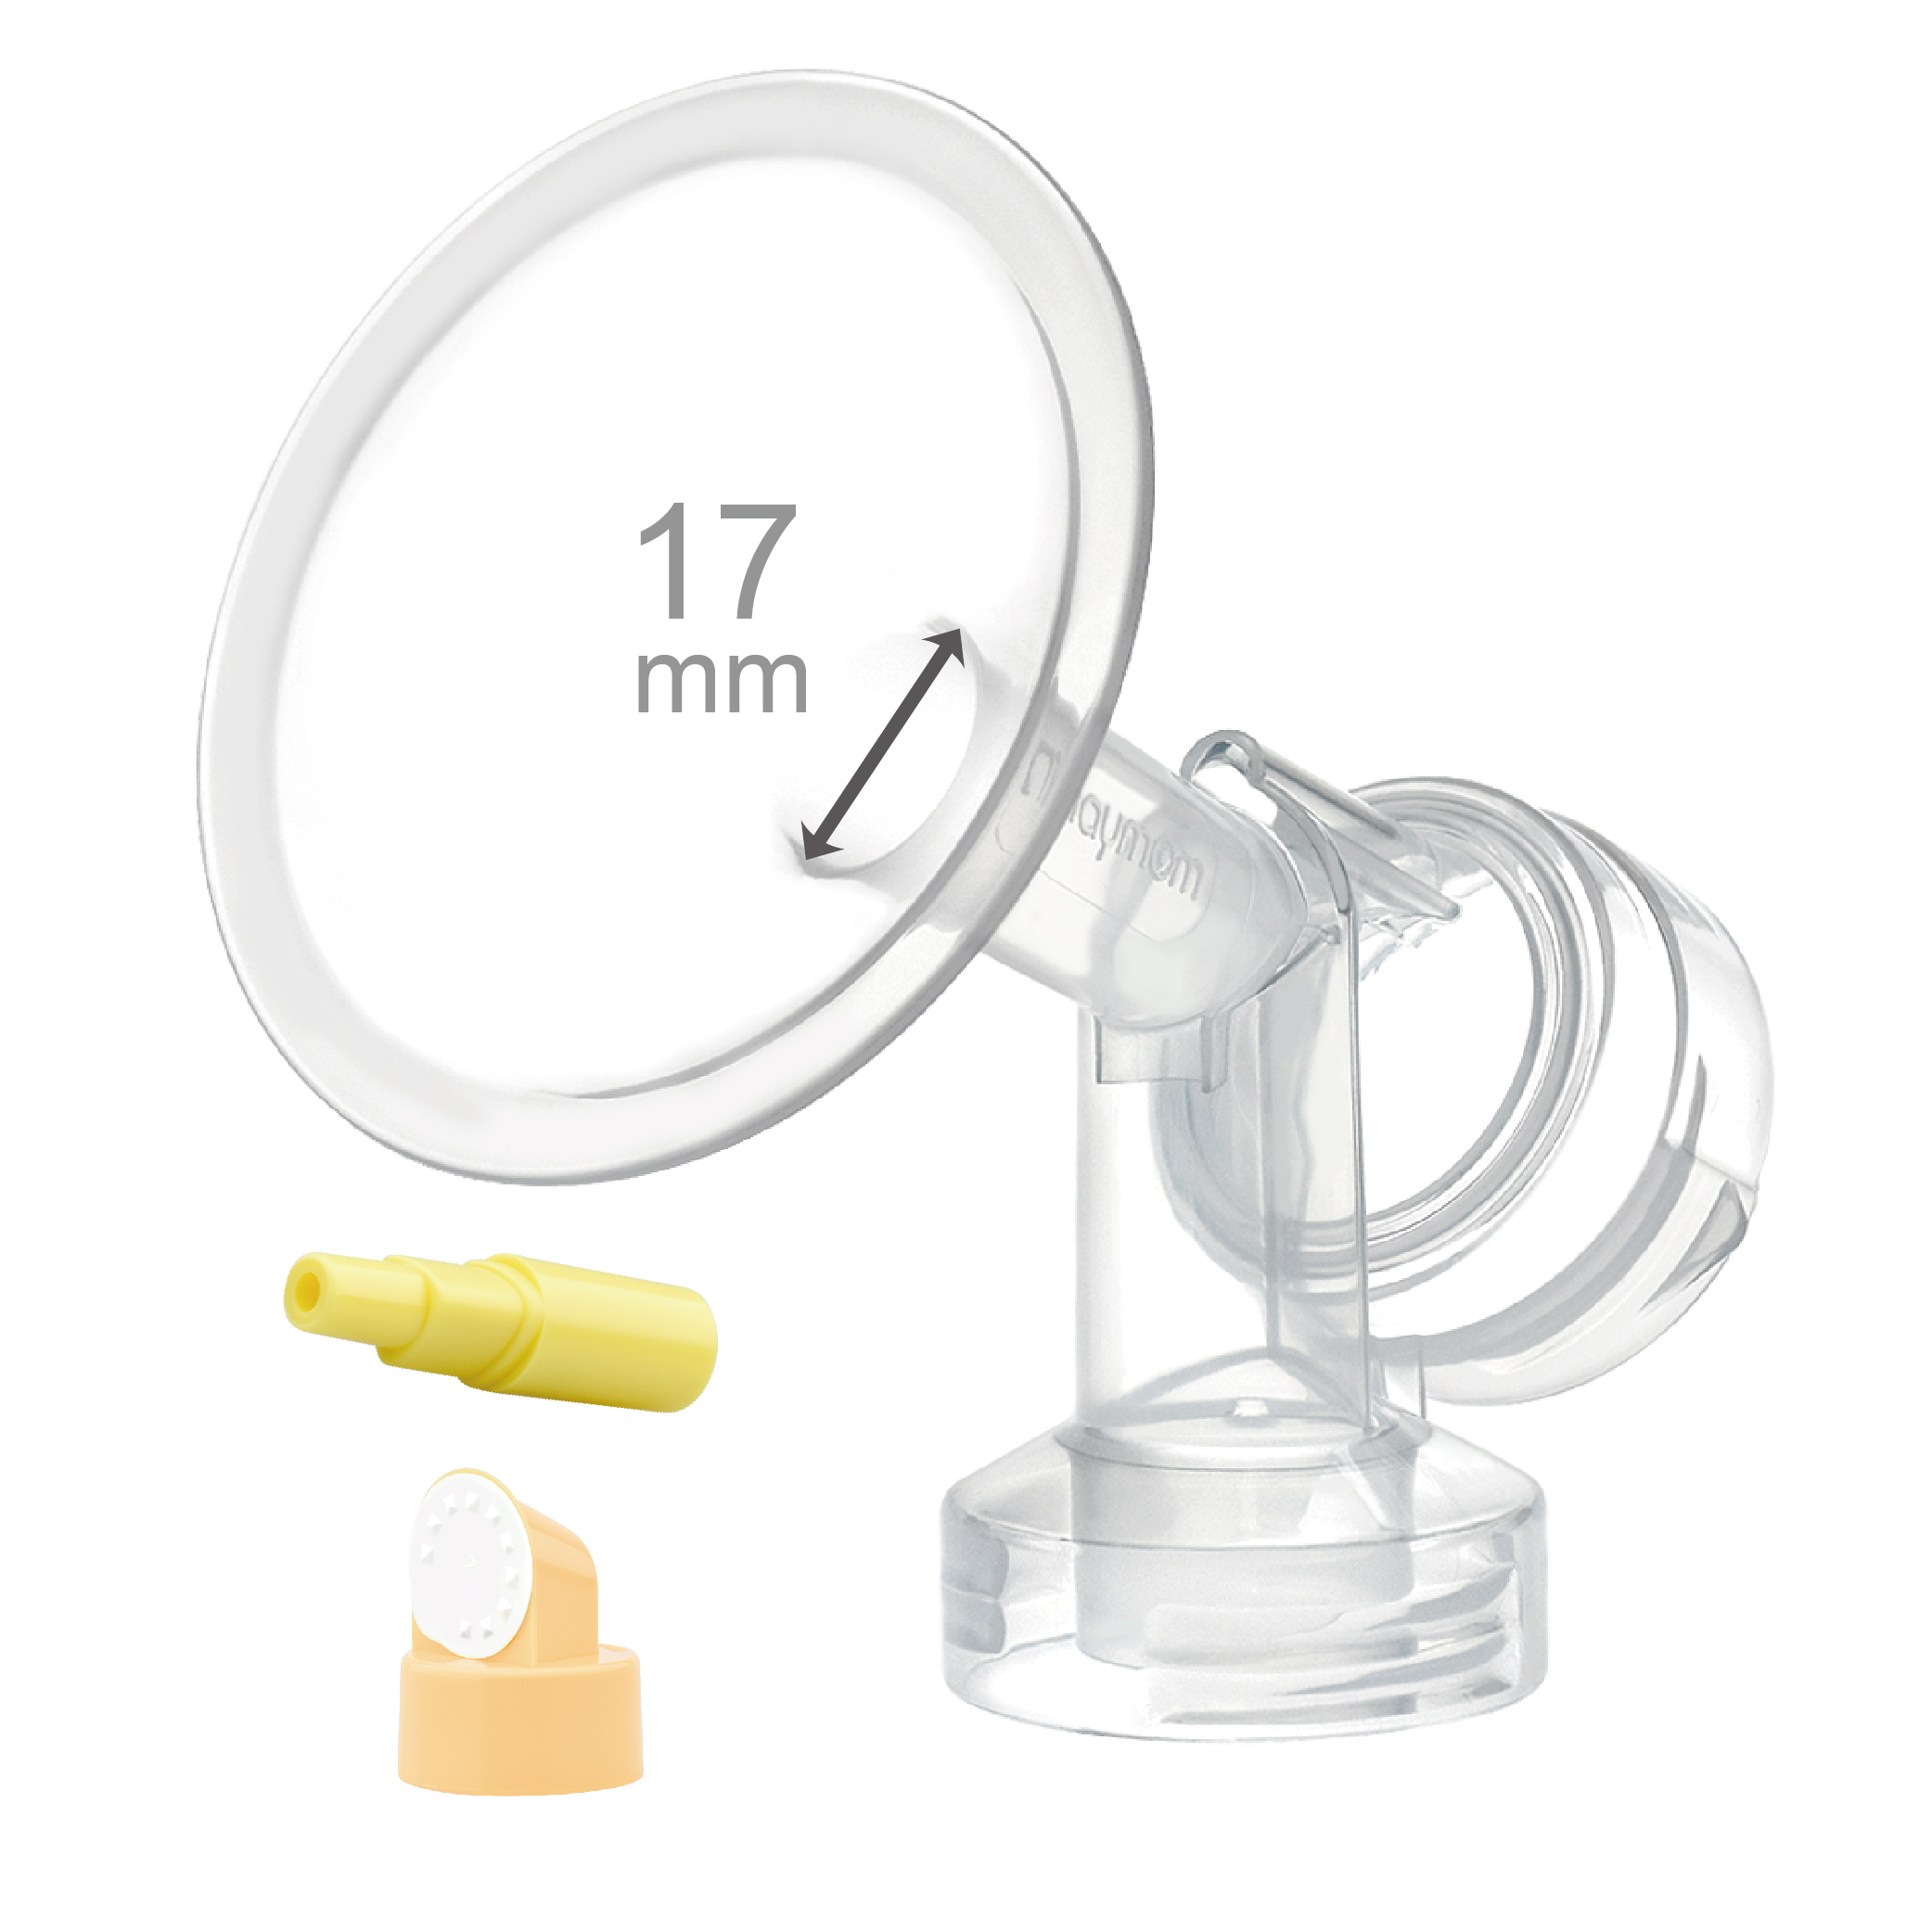 17 mm Extra Small Flange w/ Valve and Membrane for SpeCtra Breast Pumps S1, S2, M1, Spectra 9; Narrow (Standard) Bottle Neck;